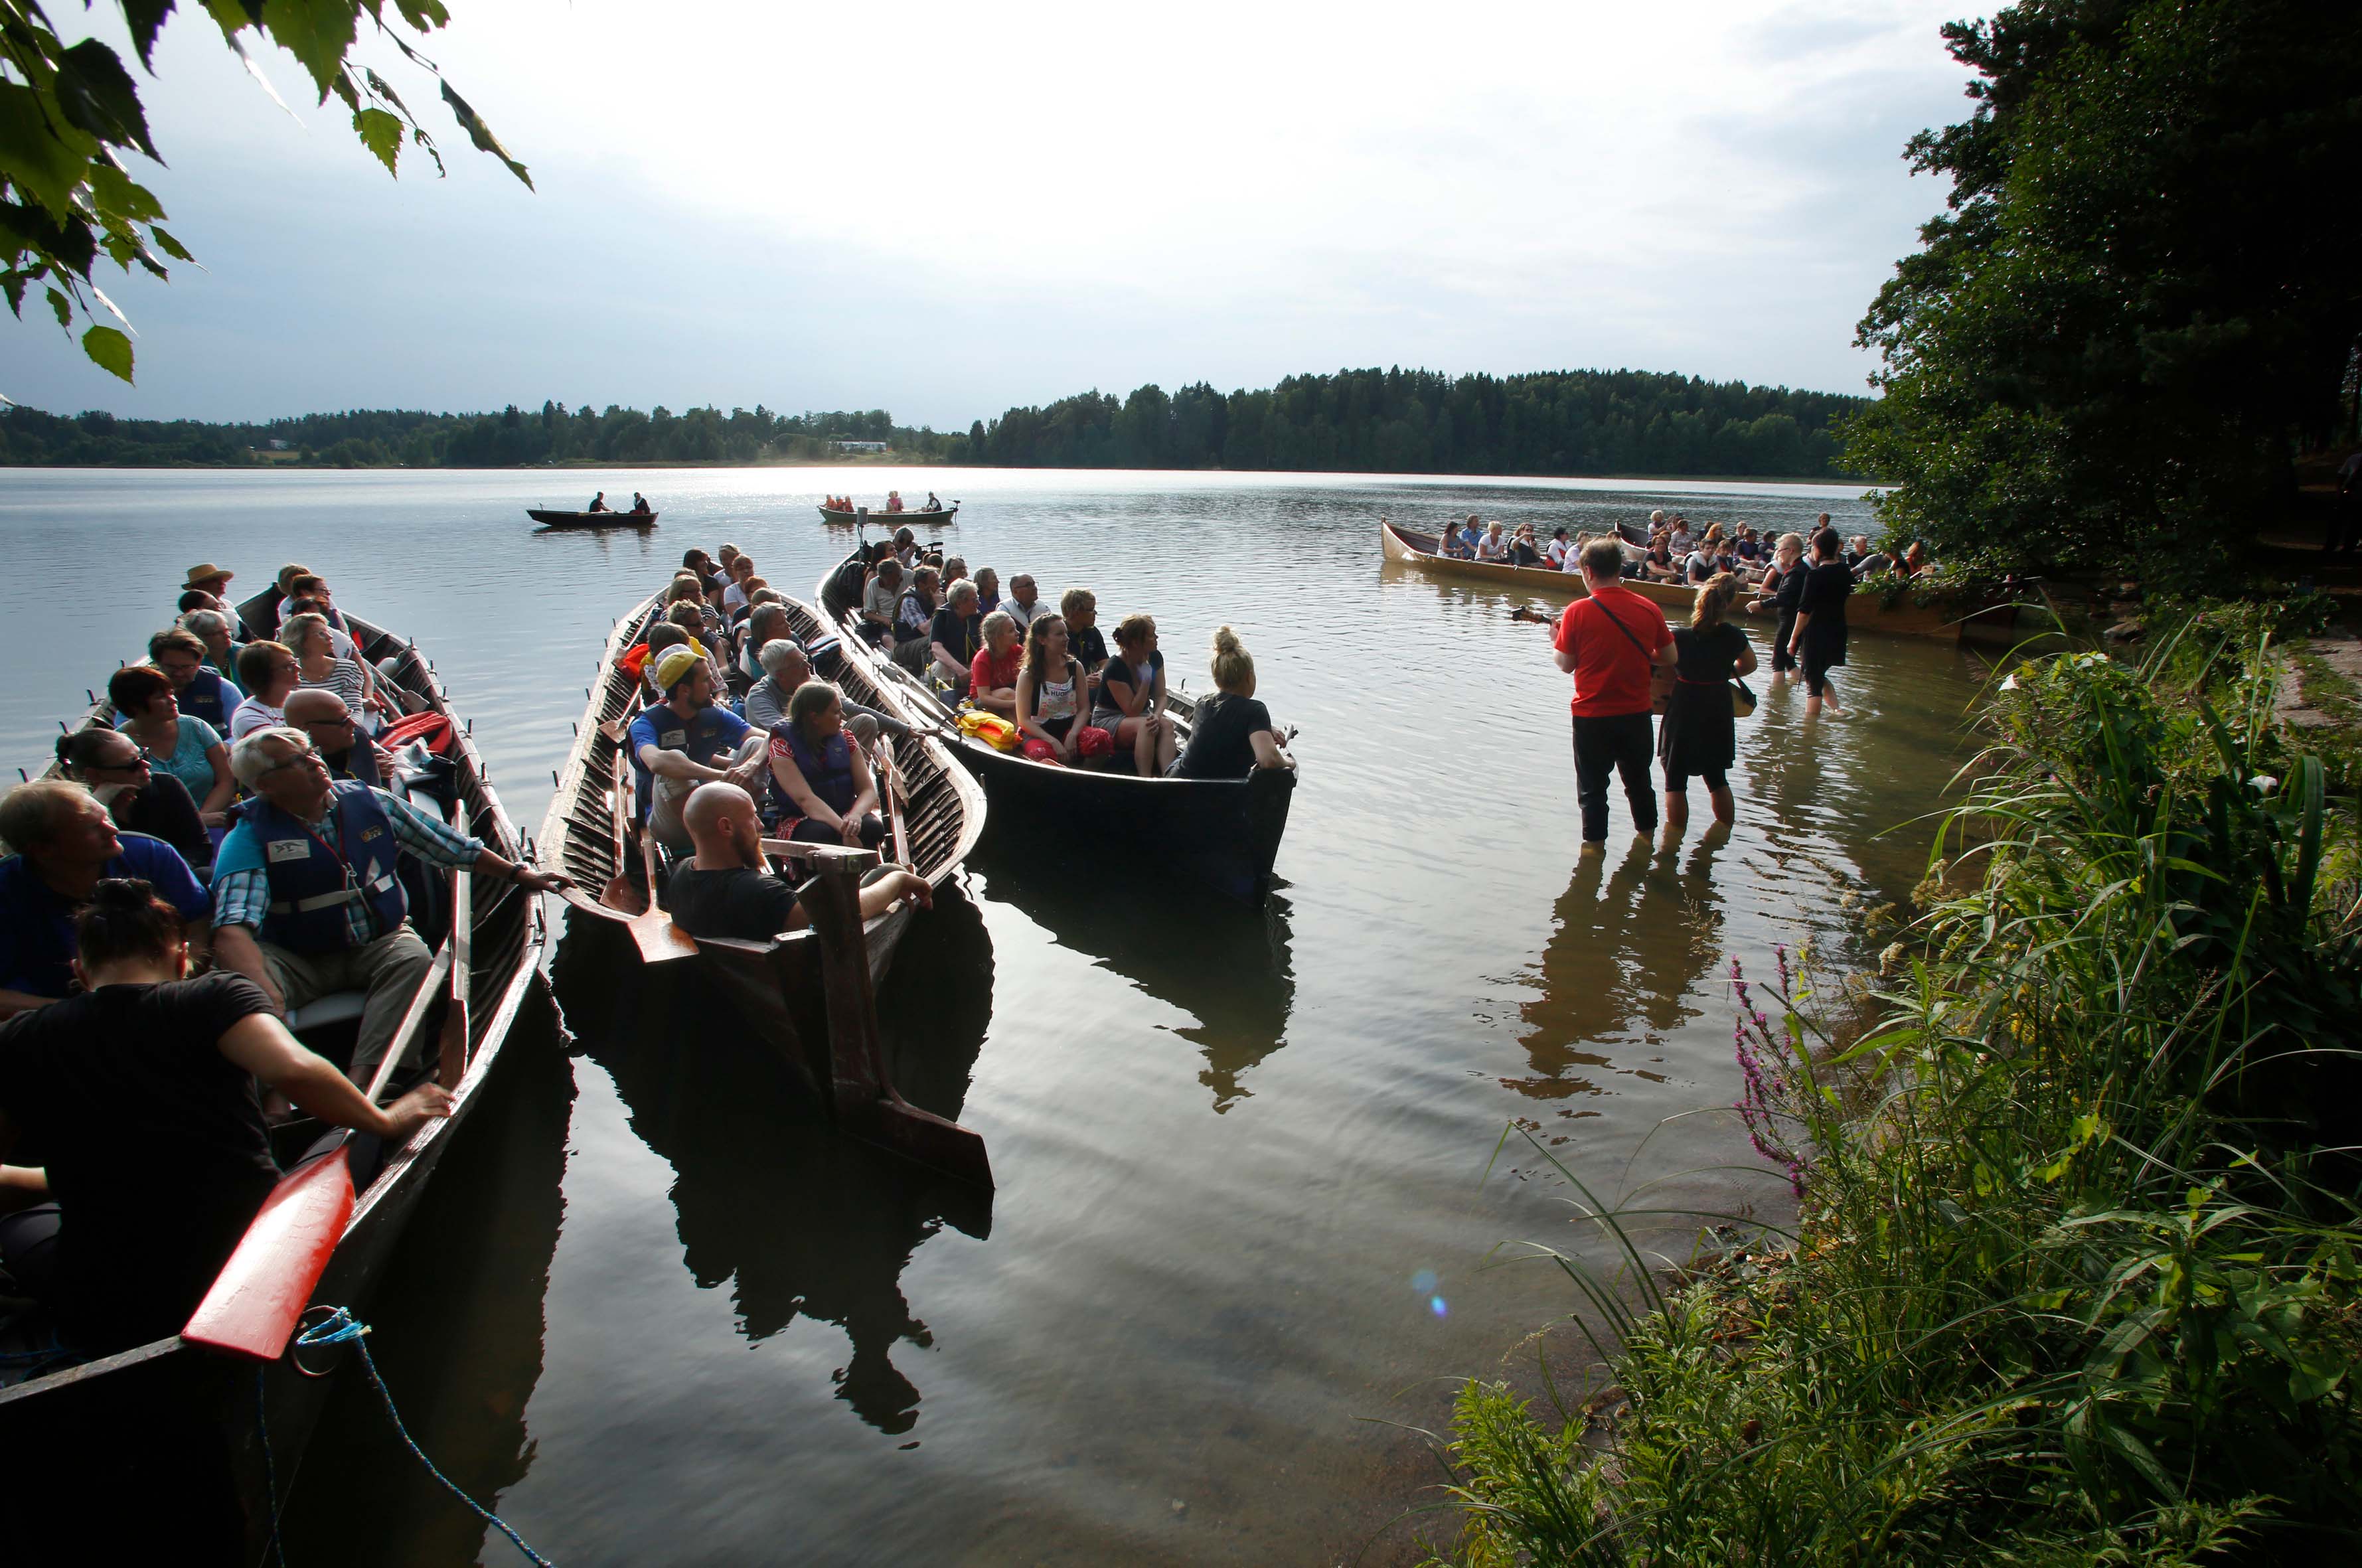 Lake Tuusula full of church boats and rowers